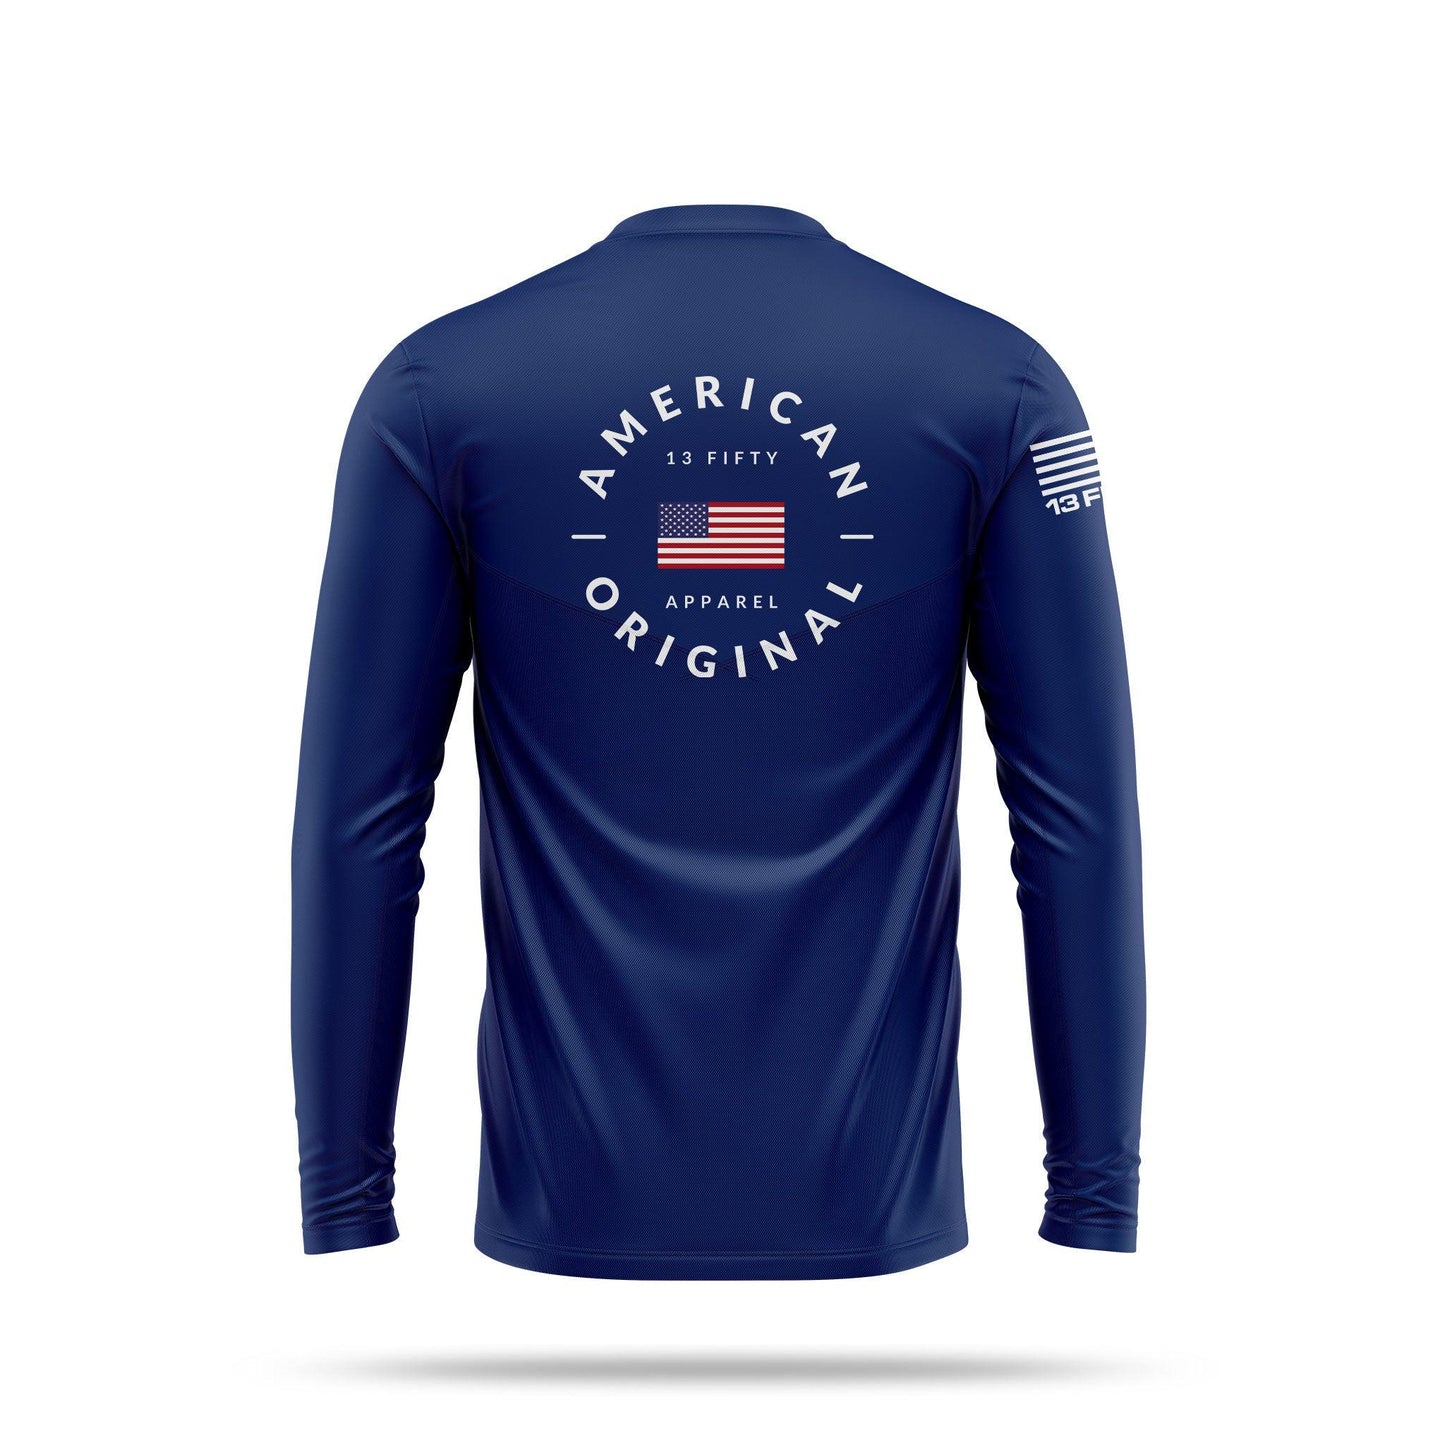 [LAKE DAY] Men's Utility Long Sleeve [NVY/WHT]-13 Fifty Apparel